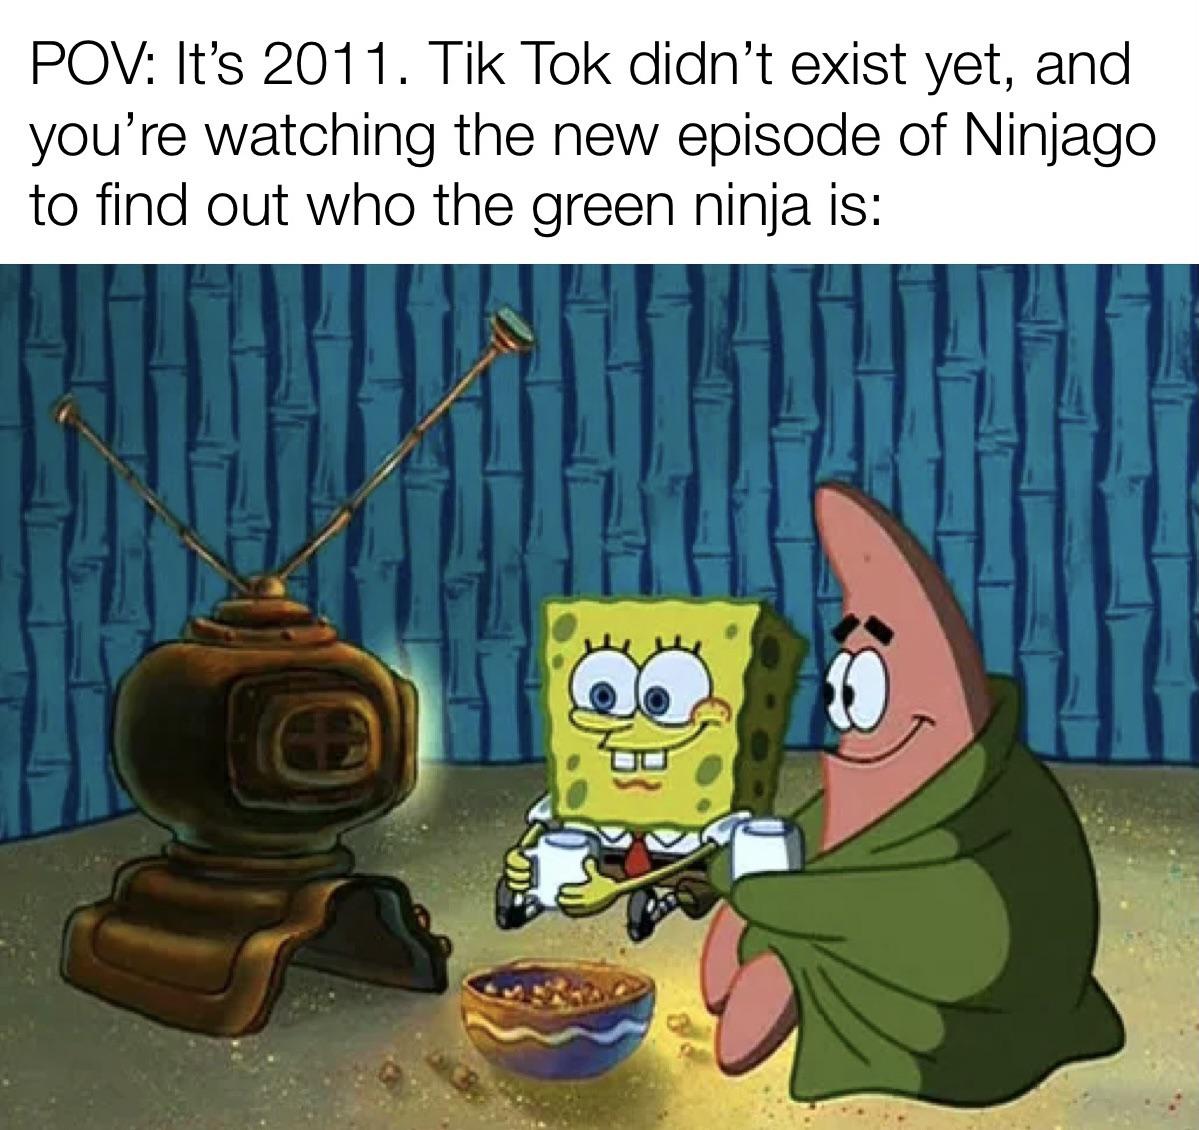 spongebob watching tv - Pov It's 2011. Tik Tok didn't exist yet, and you're watching the new episode of Ninjago to find out who the green ninja is